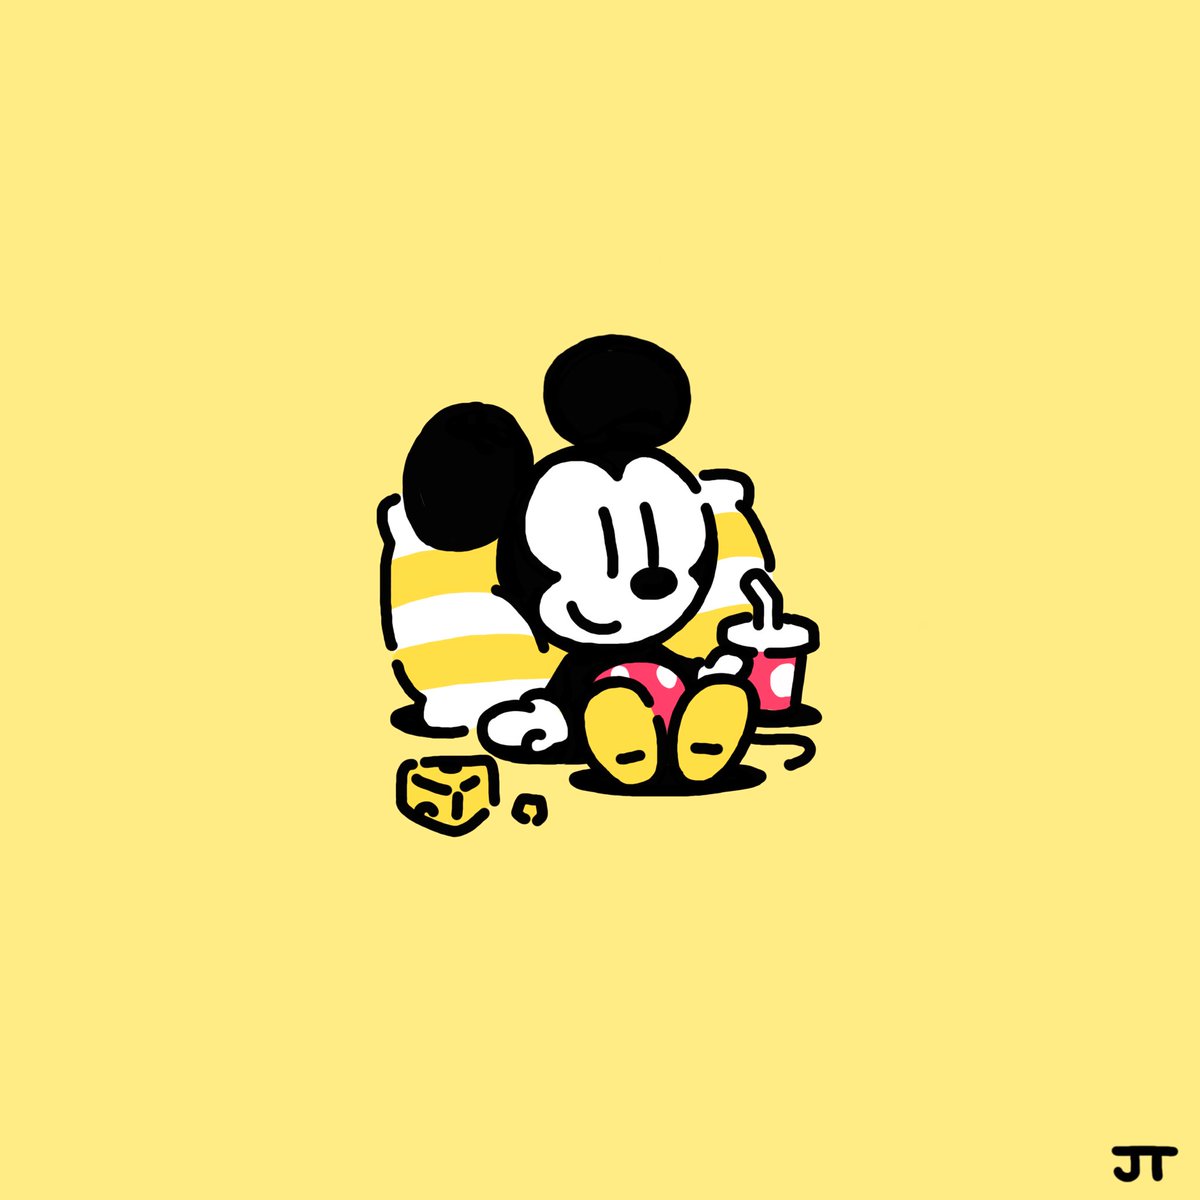 「Chill Mickey」|James Turnerのイラスト